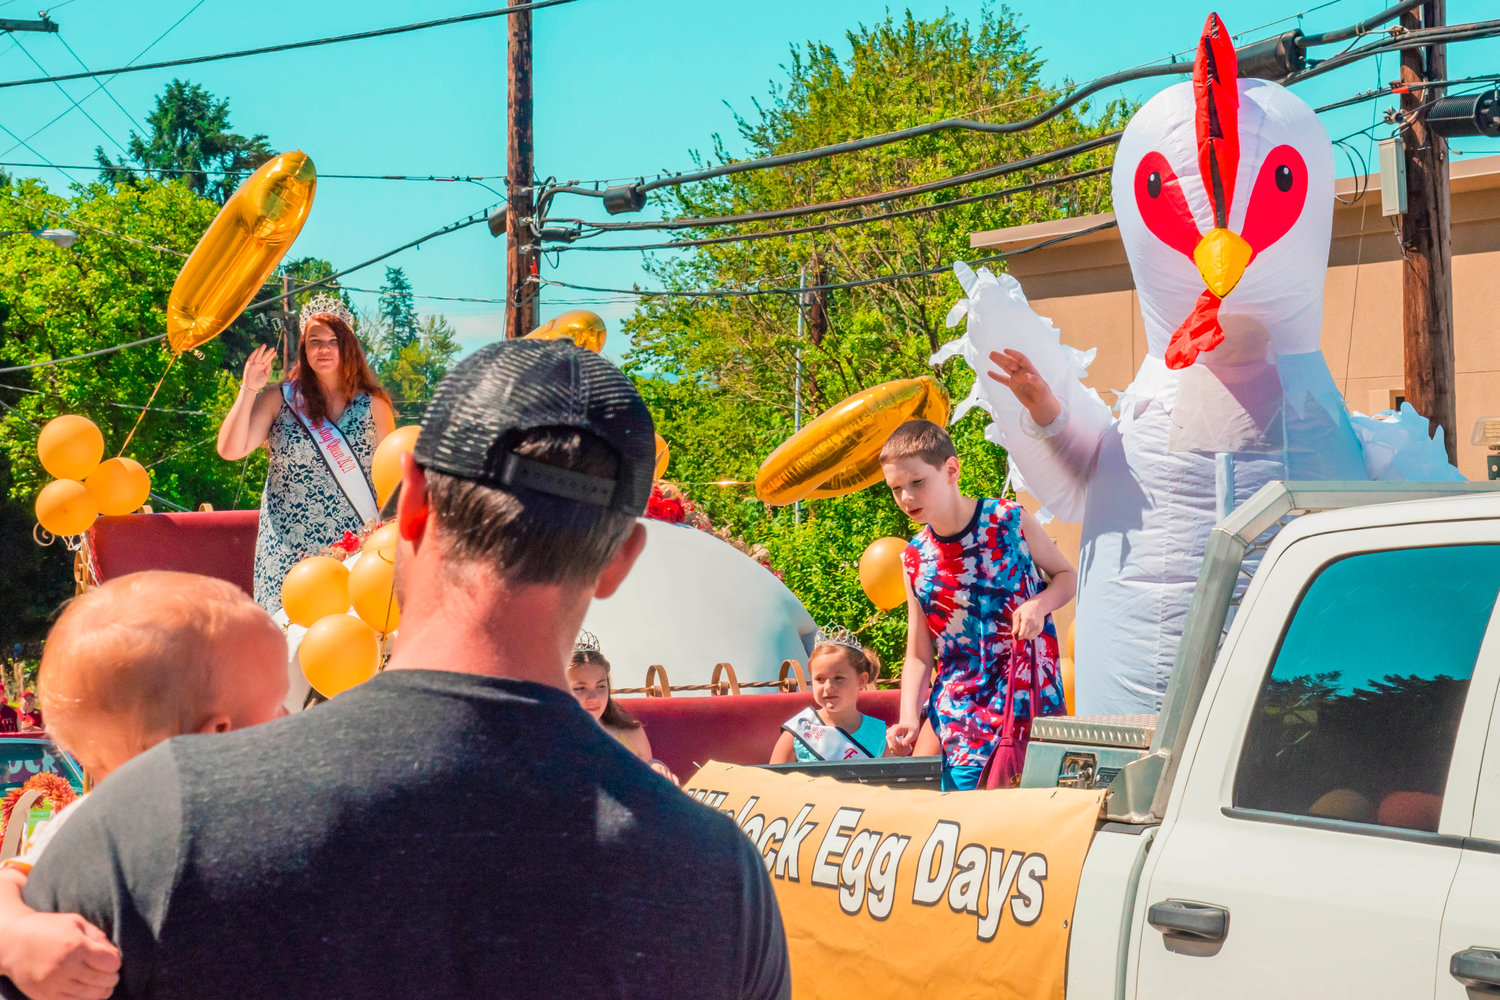 Kids wave from a float during the Winlock Egg Days parade on Saturday.